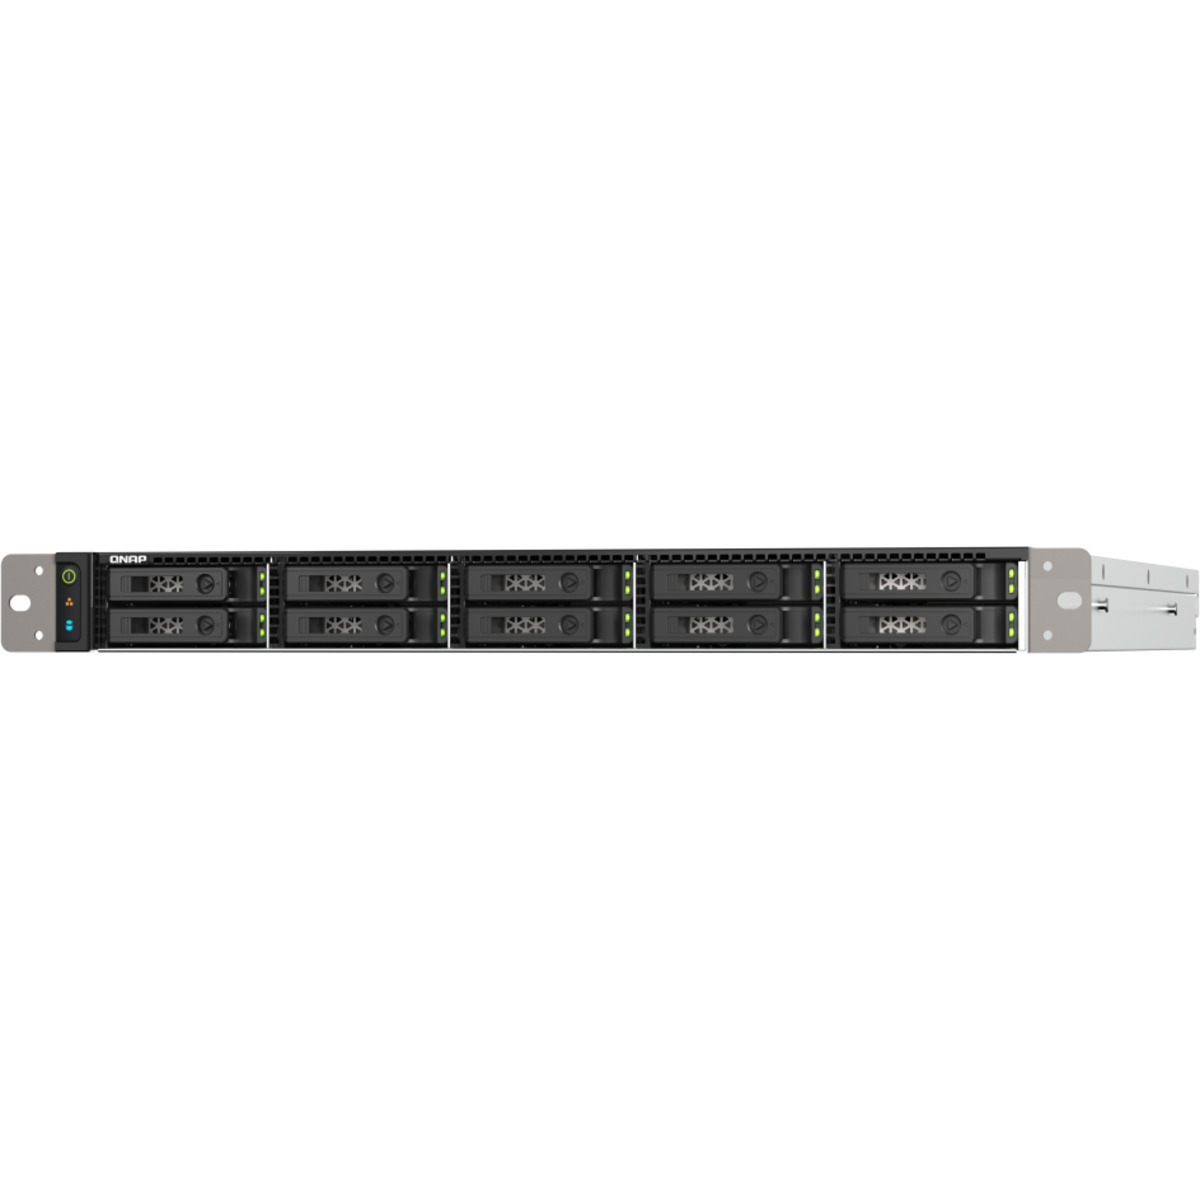 QNAP TS-h1090FU-7302P 5tb 10-Bay RackMount Large Business / Enterprise NAS - Network Attached Storage Device 10x500gb Sabrent Rocket 4 Plus SB-RKT4P-500  7000/3700MB/s M.2 2280 NVMe SSD CONSUMER Class Drives Installed - Burn-In Tested TS-h1090FU-7302P